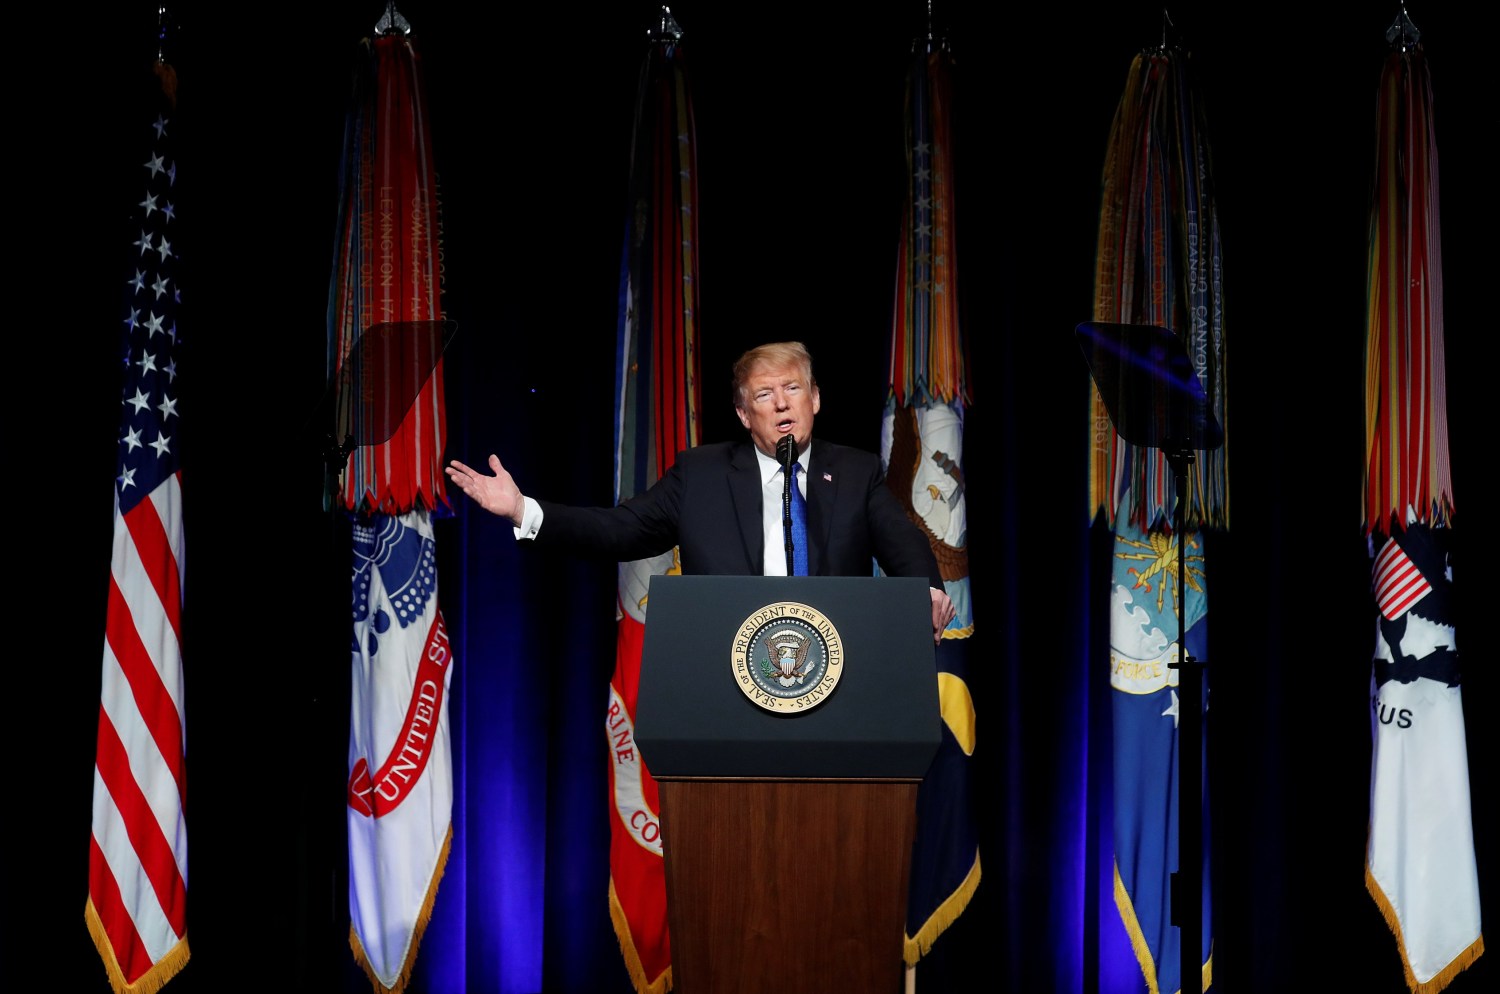 U.S. President Donald Trump speaks during the Missile Defense Review announcement at the Pentagon in Arlington, Virginia, U.S., January 17, 2019. REUTERS/Kevin Lamarque - RC15E60575C0